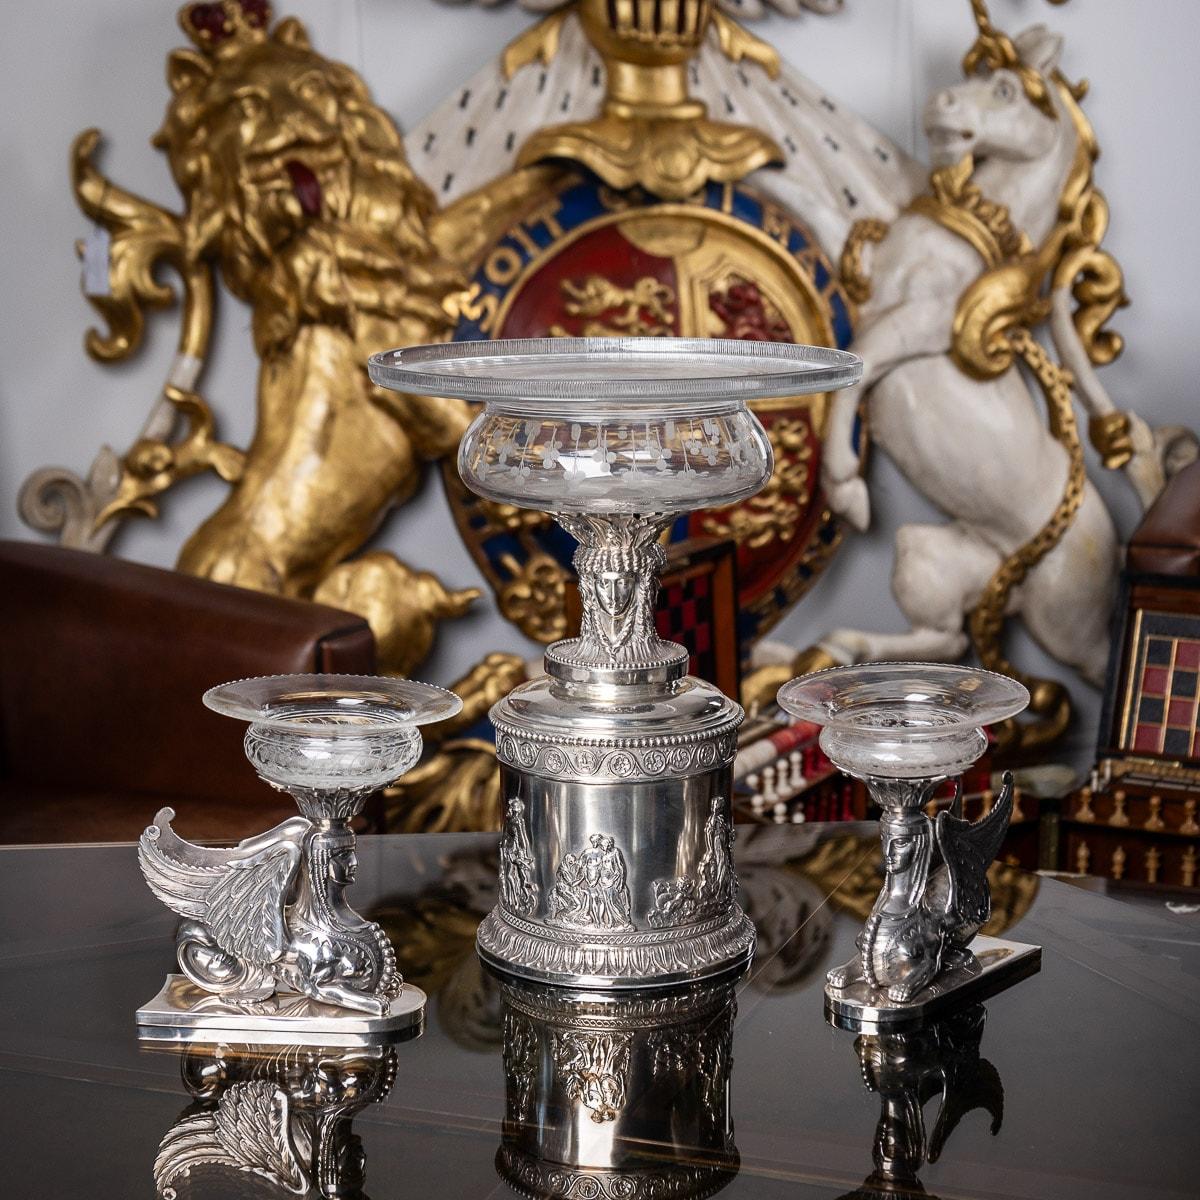 Antique 19th century rare and magnificent Victorian solid silver three-piece table garniture, the cylindrical central piece applied with a cast Neoclassical frieze depicting mythological figures, surmounted by a triple-headed Greek goddess, the